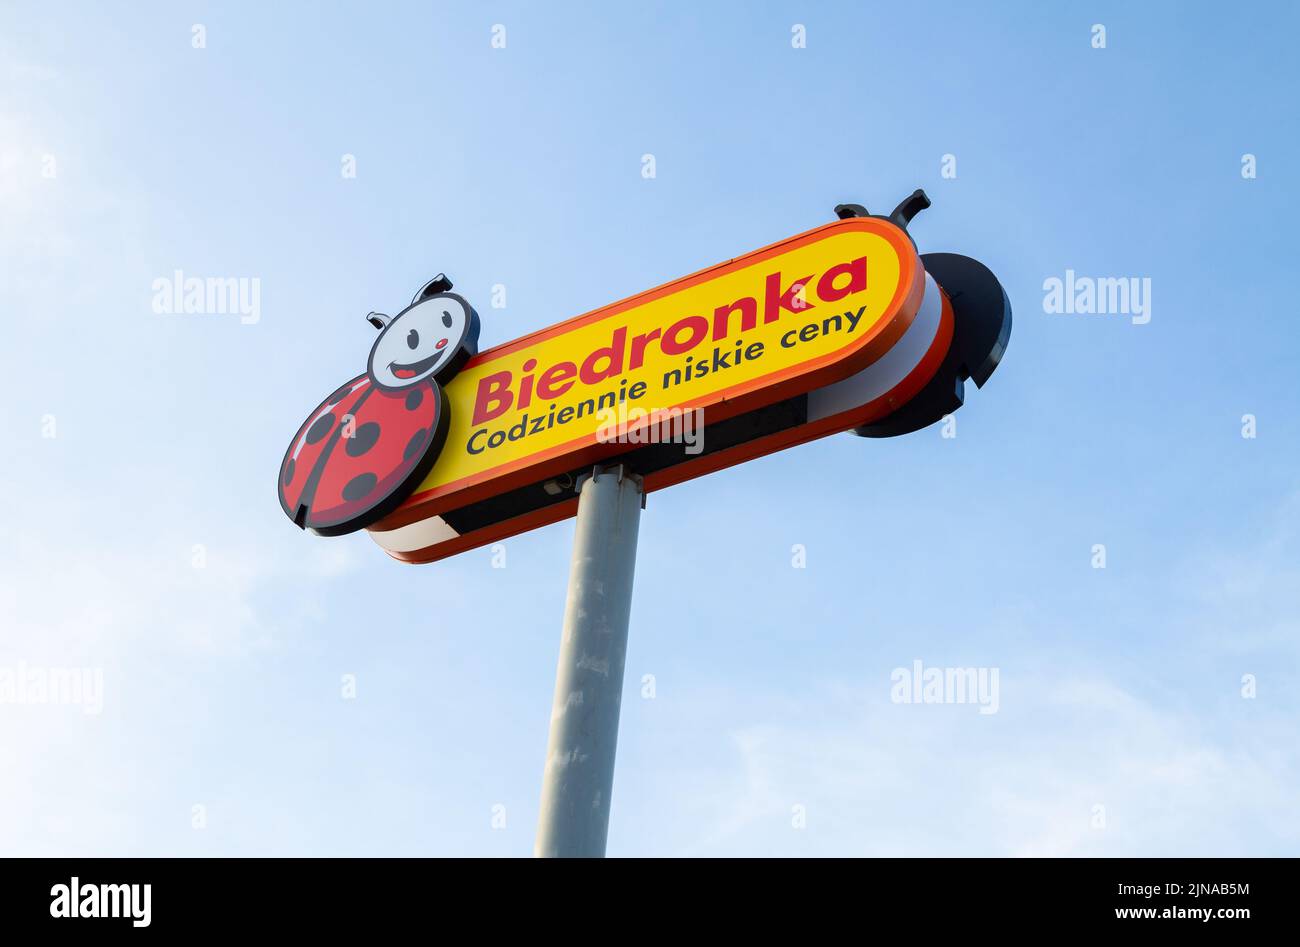 Biedronka supermarket shop logo sign. Retail chain of discount shops in Poland. Convenience grocery store logotype signboard, Polish shopping center. Stock Photo